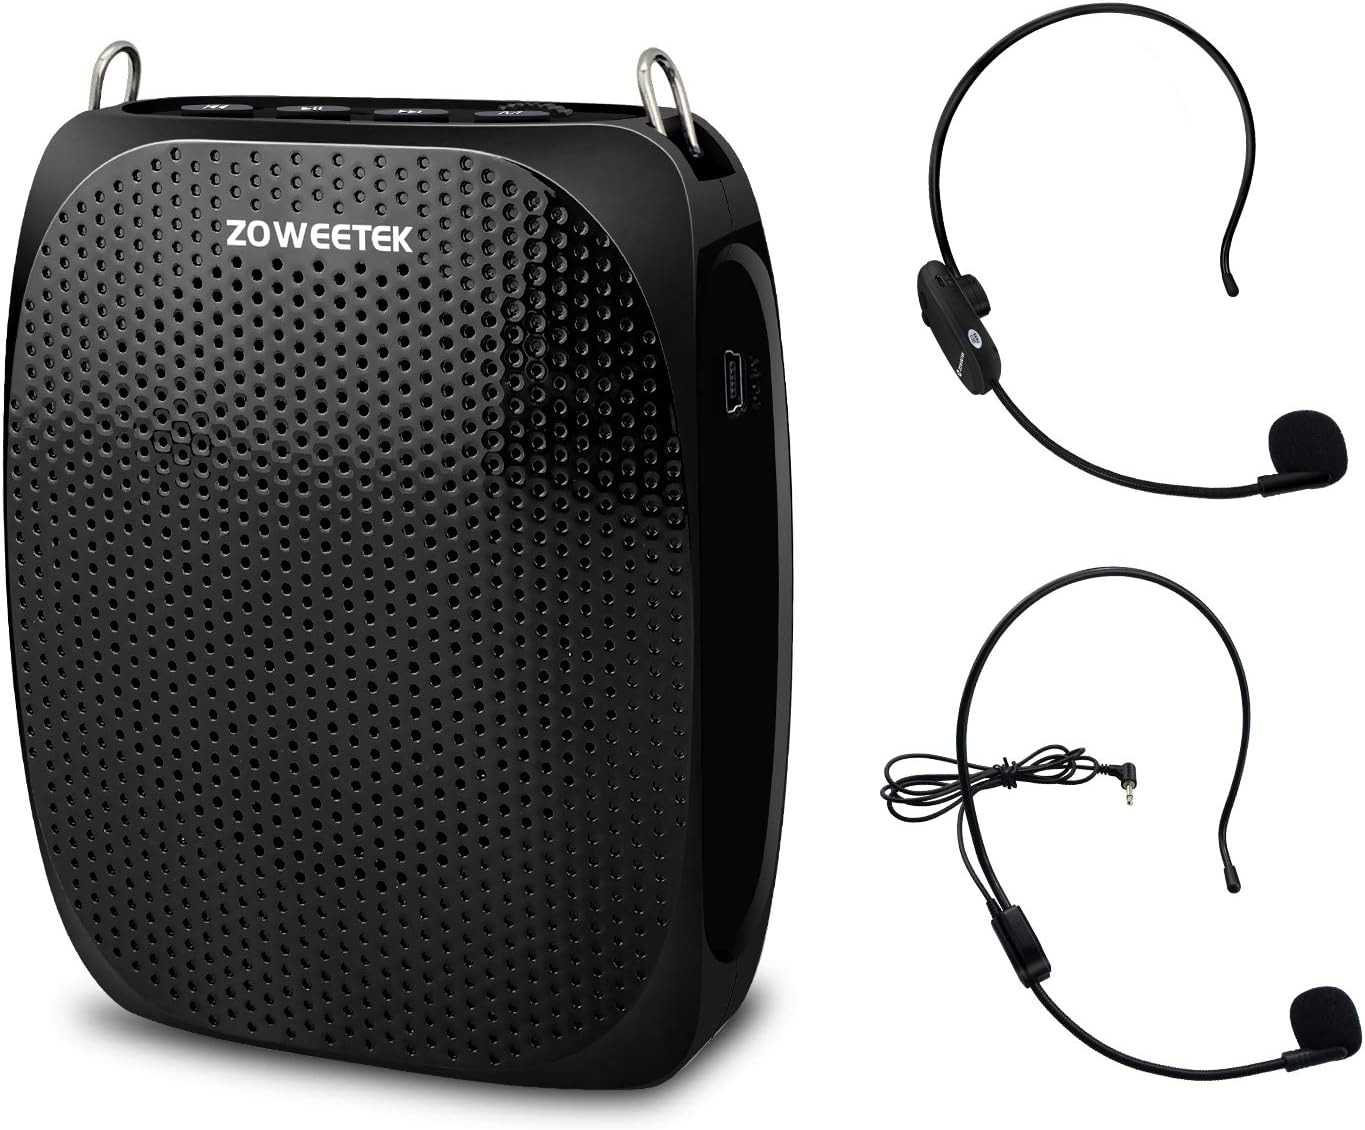 ZOWEETEK Wireless Voice Amplifier with UHF Microphone Headset,Portable Voice Amp